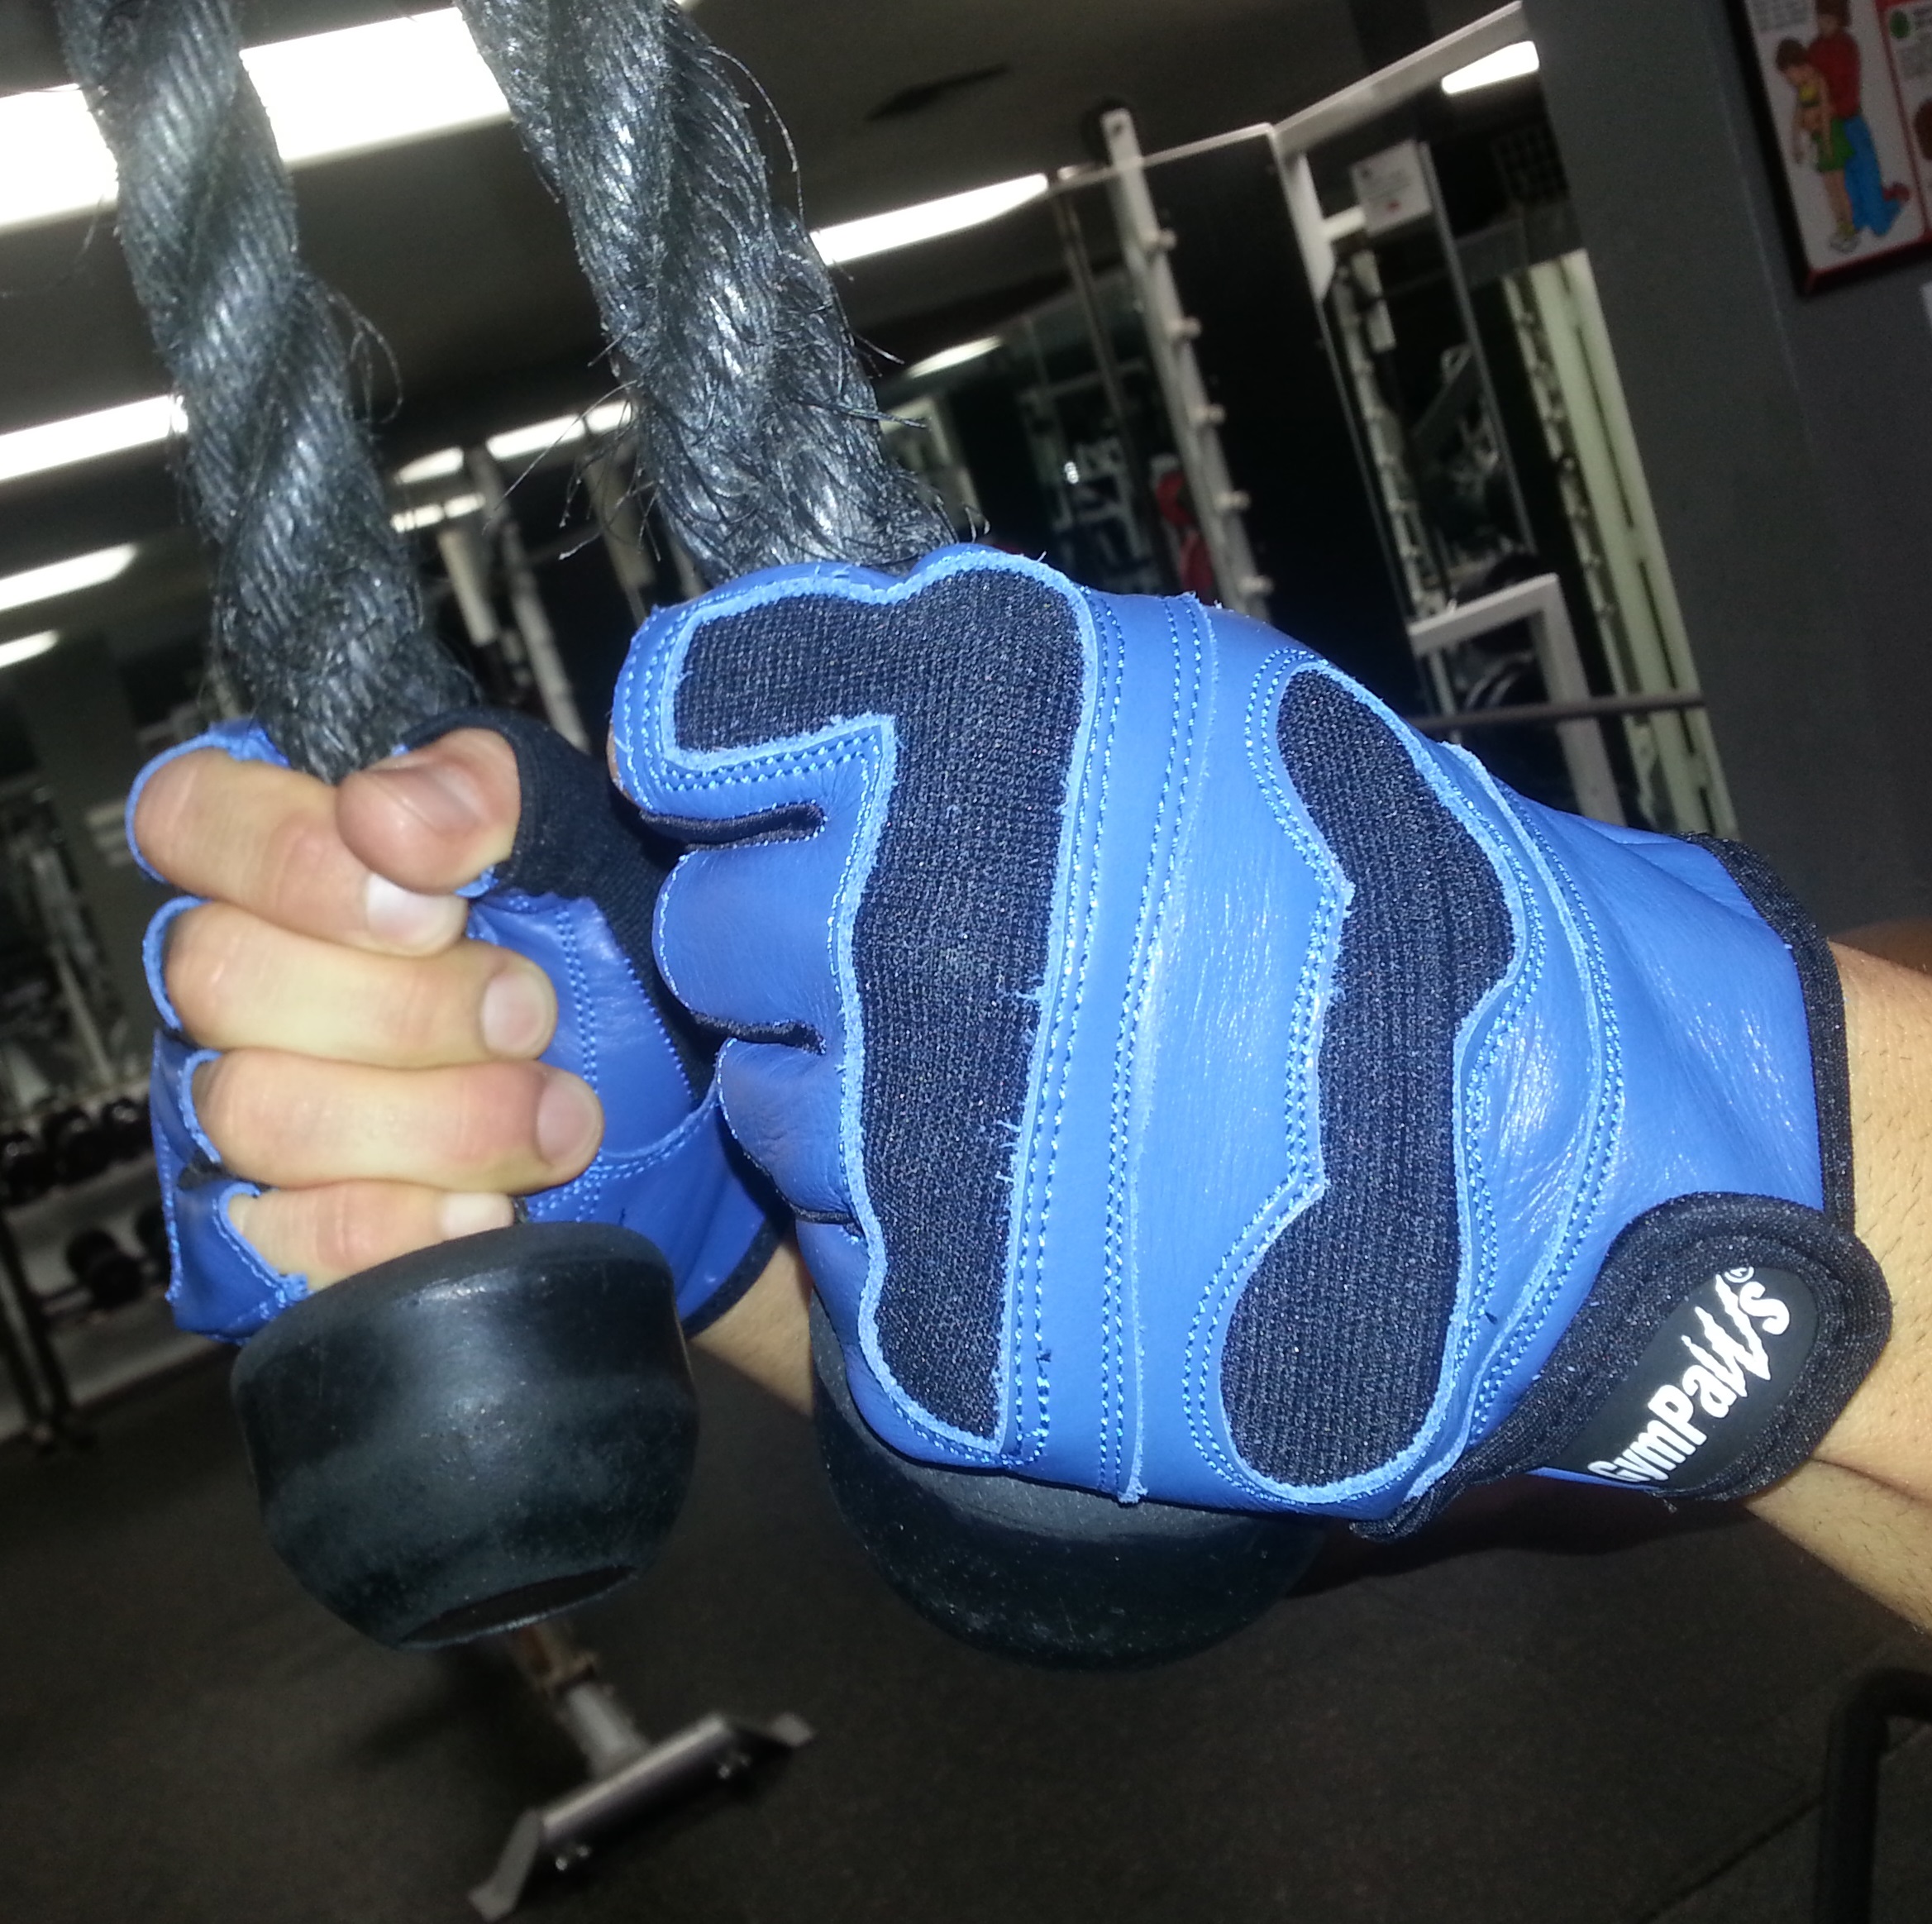 The Swolemate Gym Glove